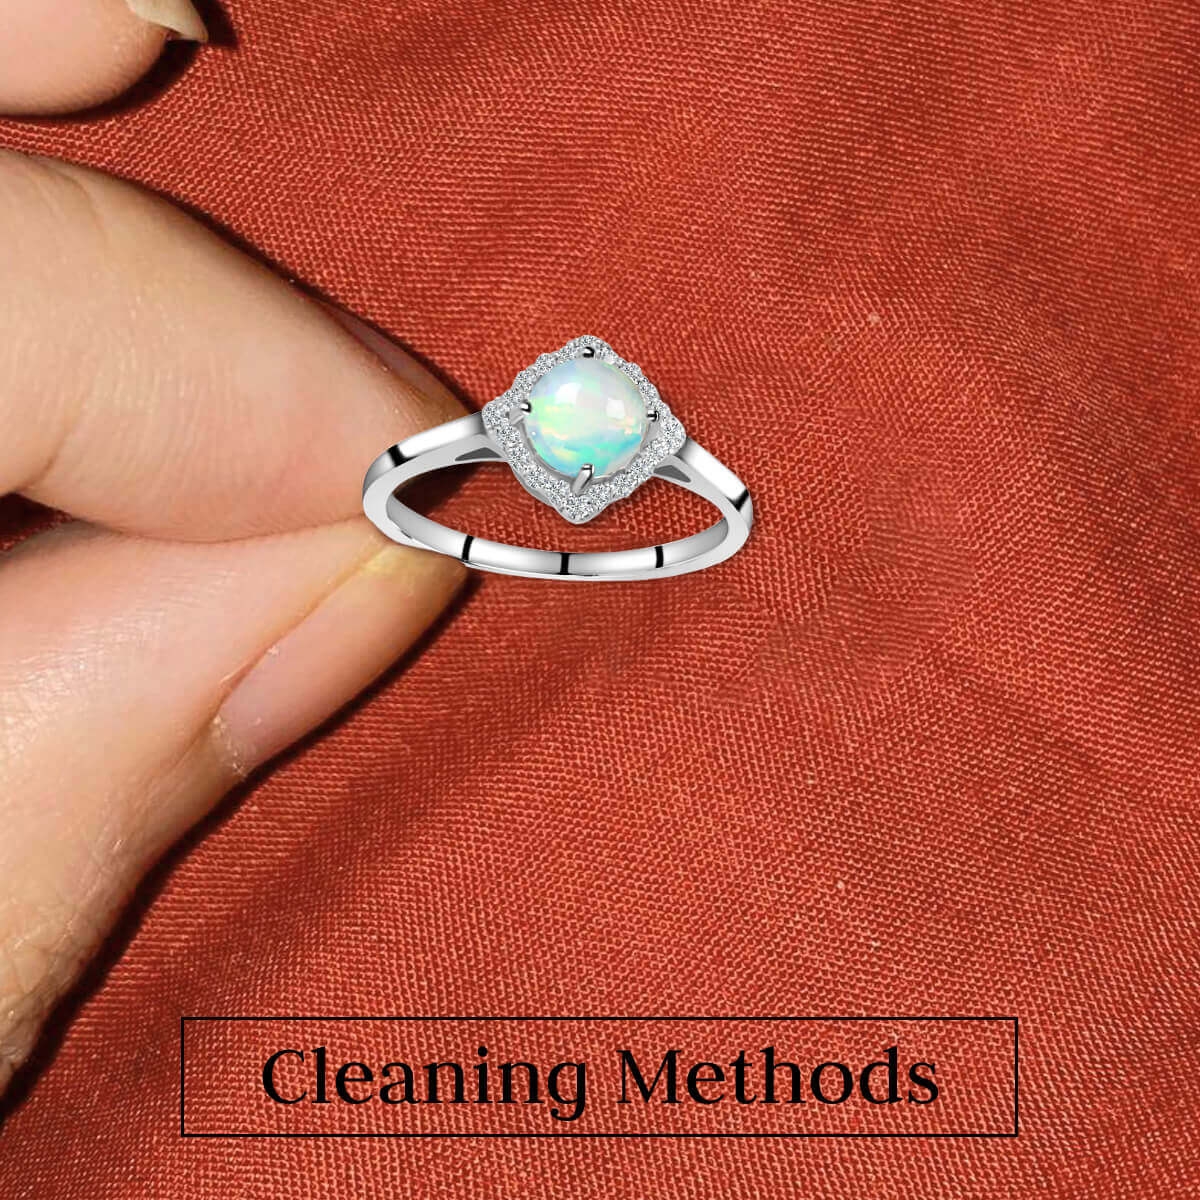 Clean Sterling Silver Jewelry at Home